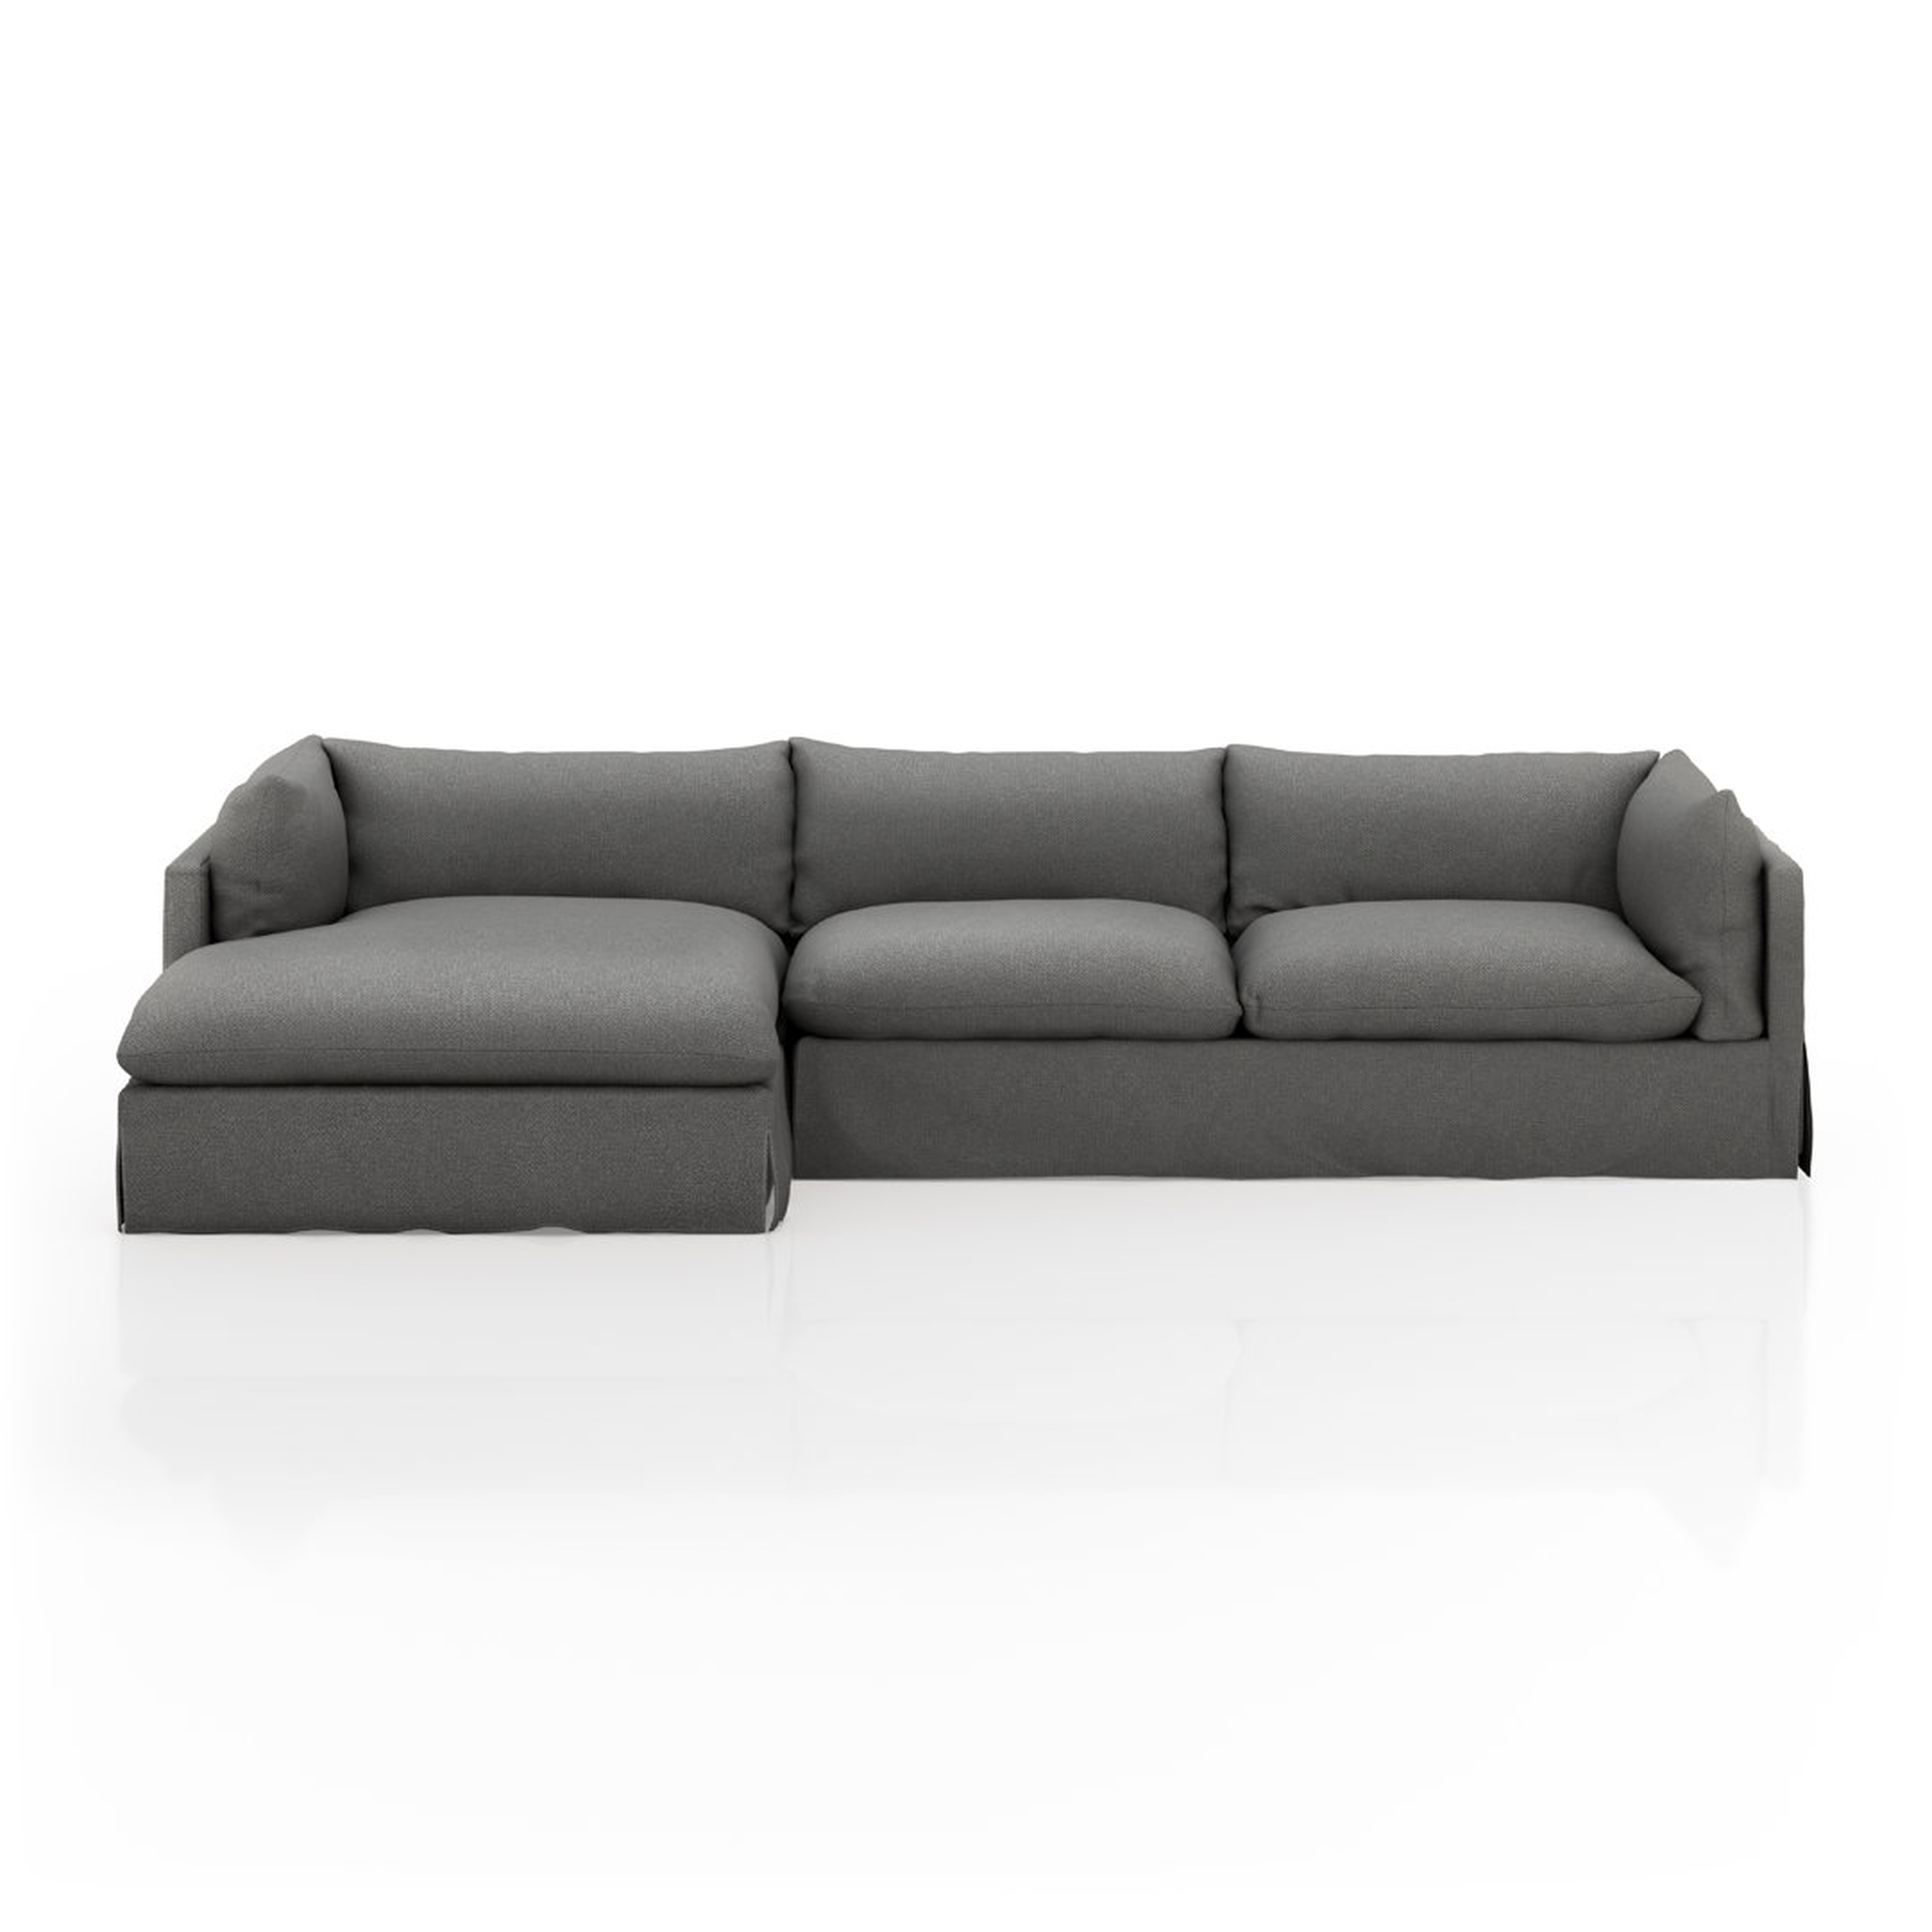 "Four Hands 131"" Wide Genuine Leather Left Hand Facing Stationary Sofa & Chaise" - Perigold